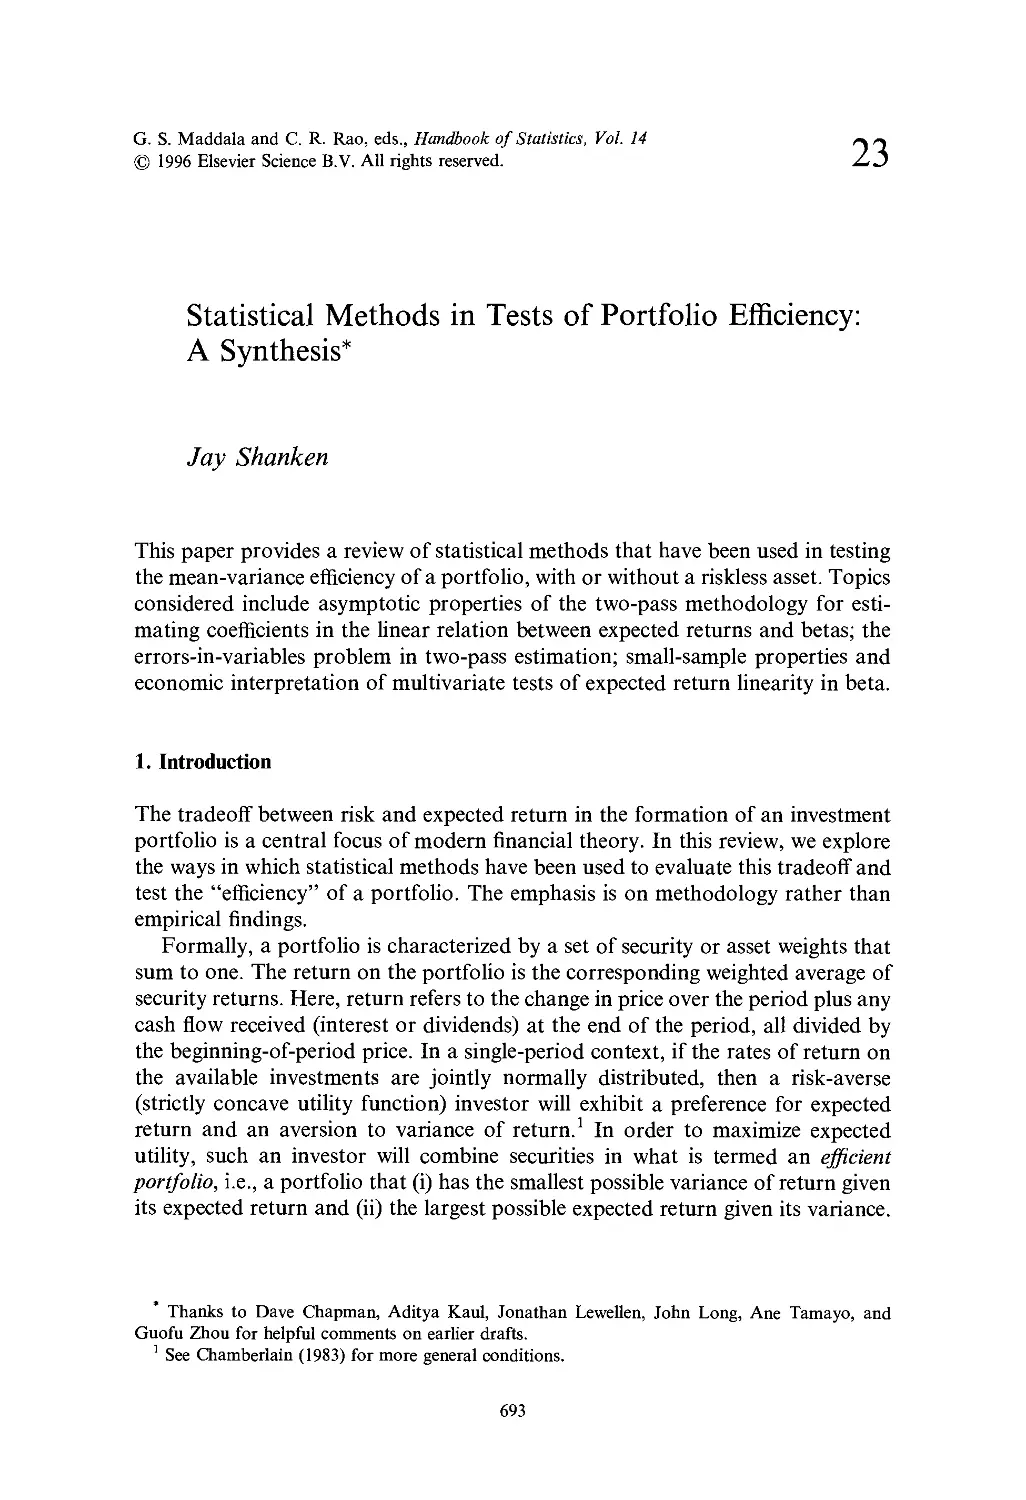 23. Statistical Methods in Tests of Portfolio Efficiency: A Synthesis